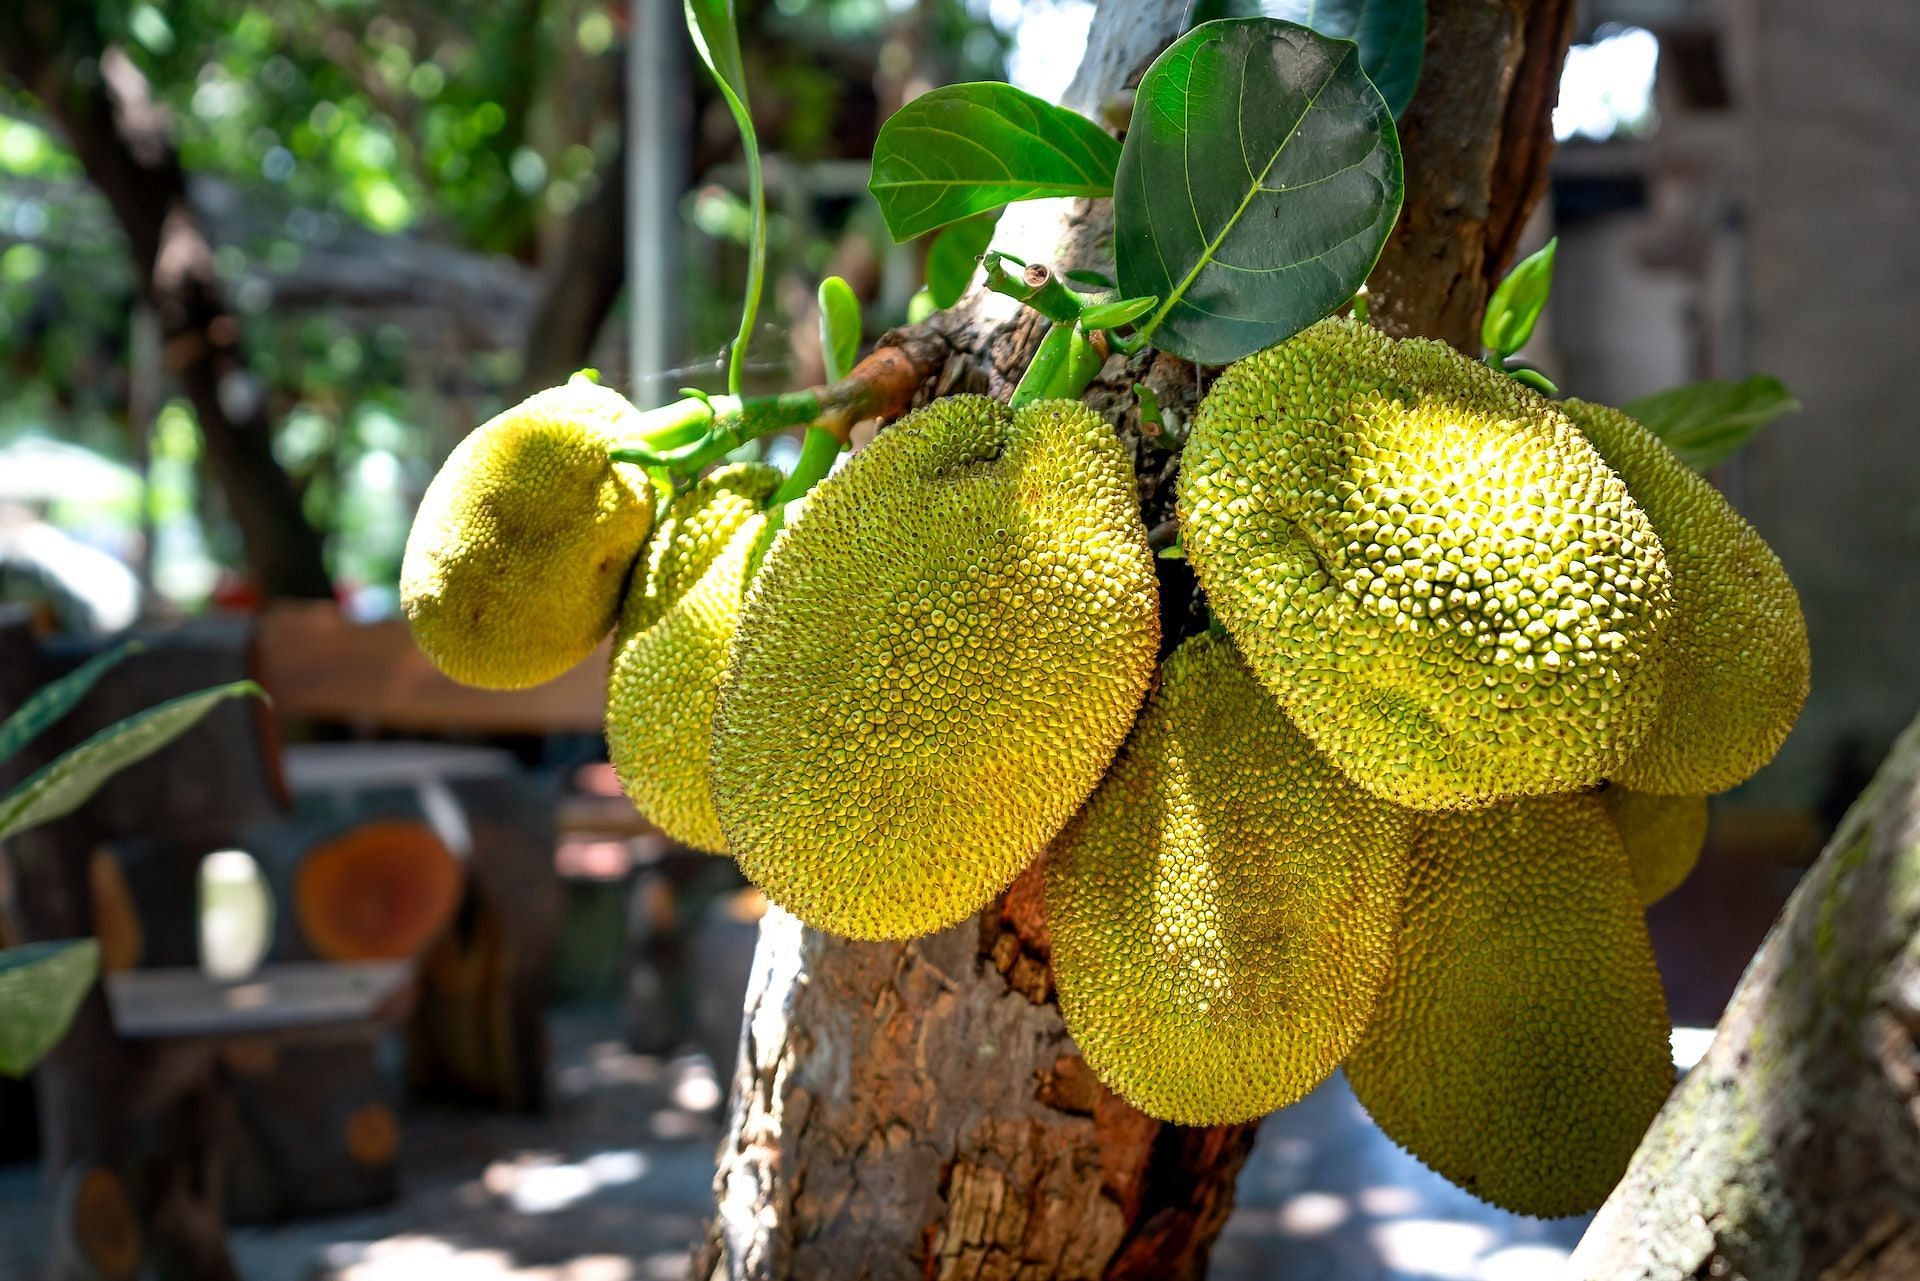 The benefits of jackfruit makes it an amazing addition to diet. (Image via Pexels/Quang Nguyen Vinh)